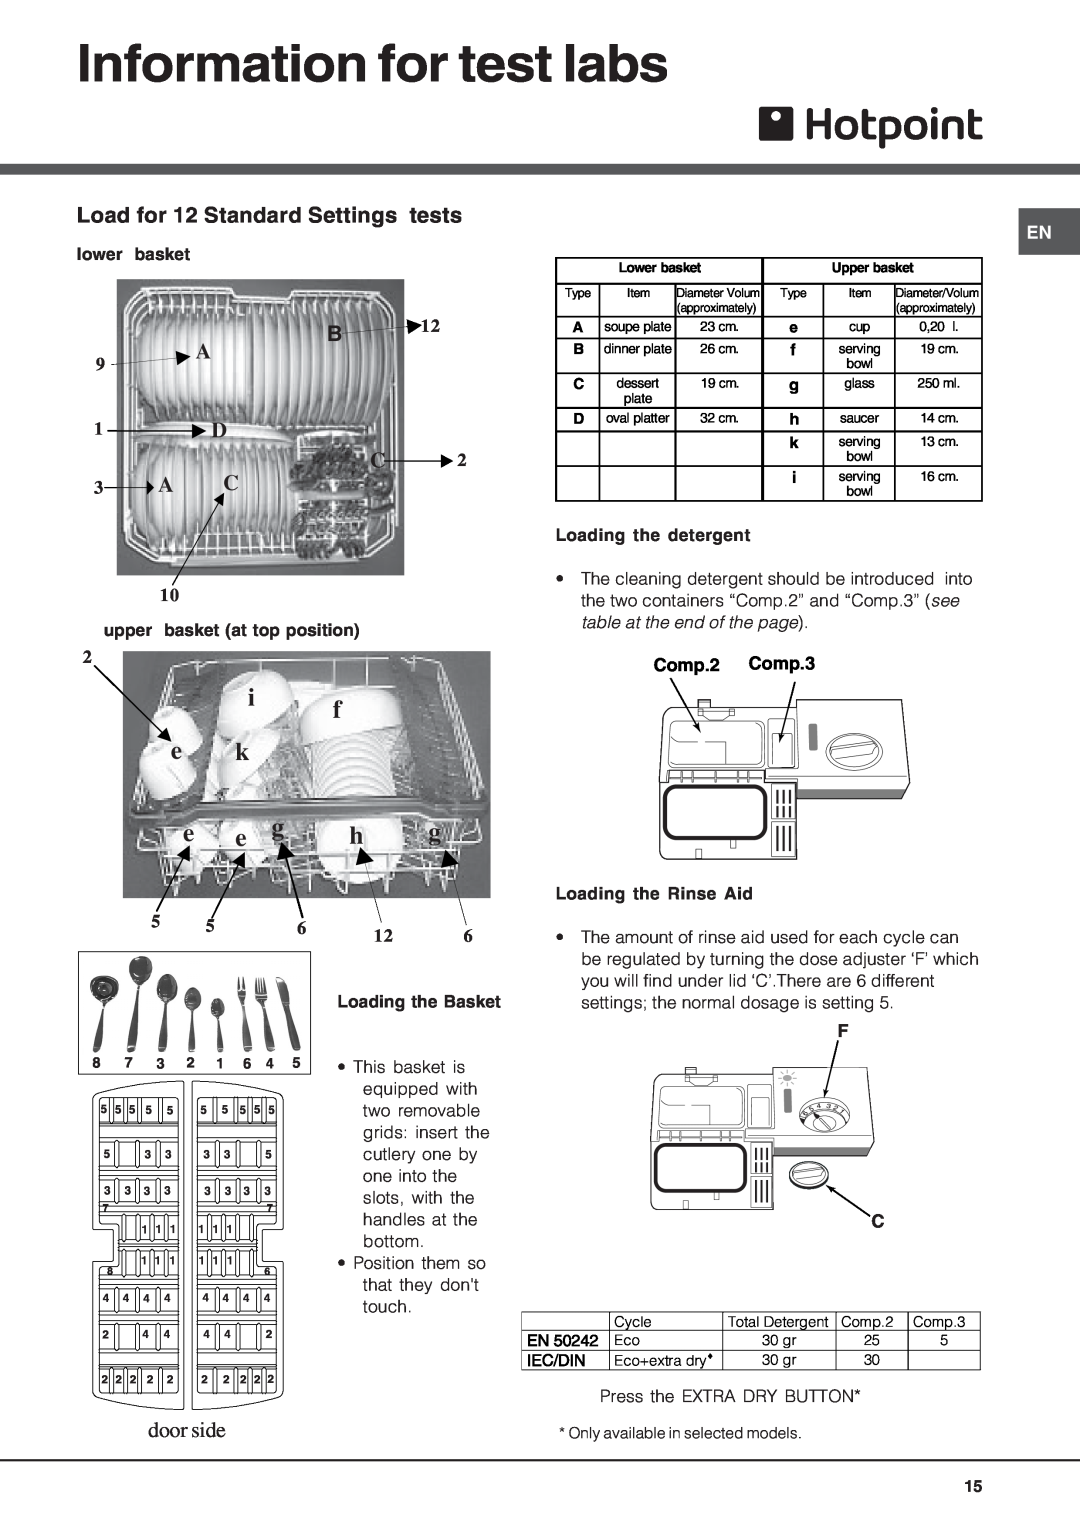 Hotpoint BFQ 700 manual Information for test labs, i e k e e g, f h g, 3A C, door side, 1 D C2, Comp.2 Comp.3 